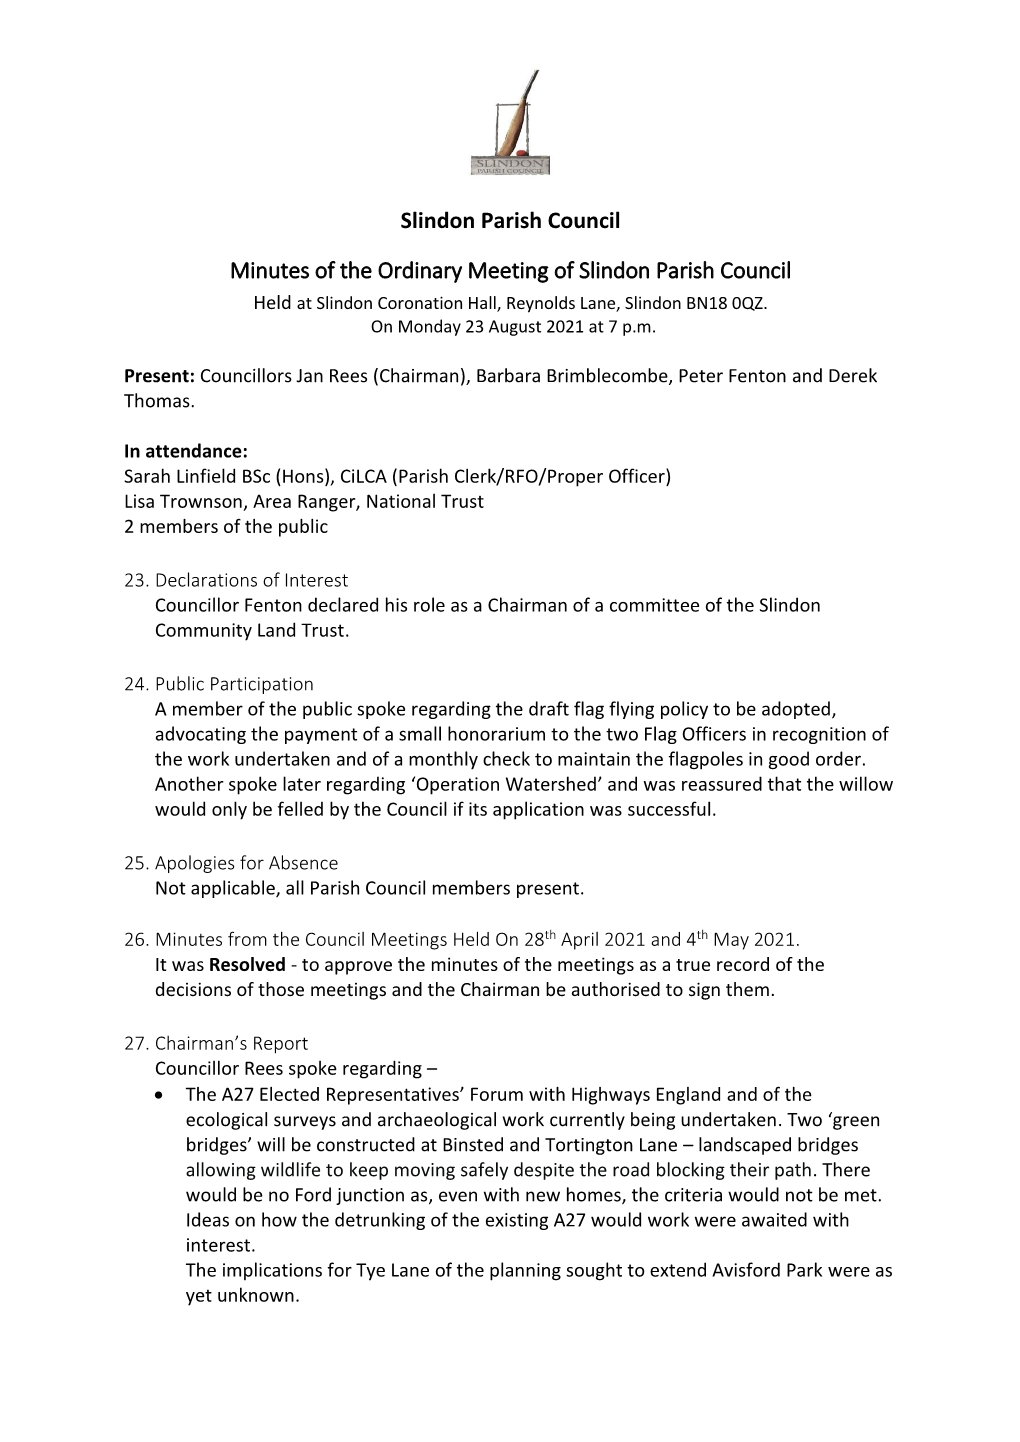 Minutes of the Ordinary Meeting of Slindon Parish Council 23 Augsut 2021